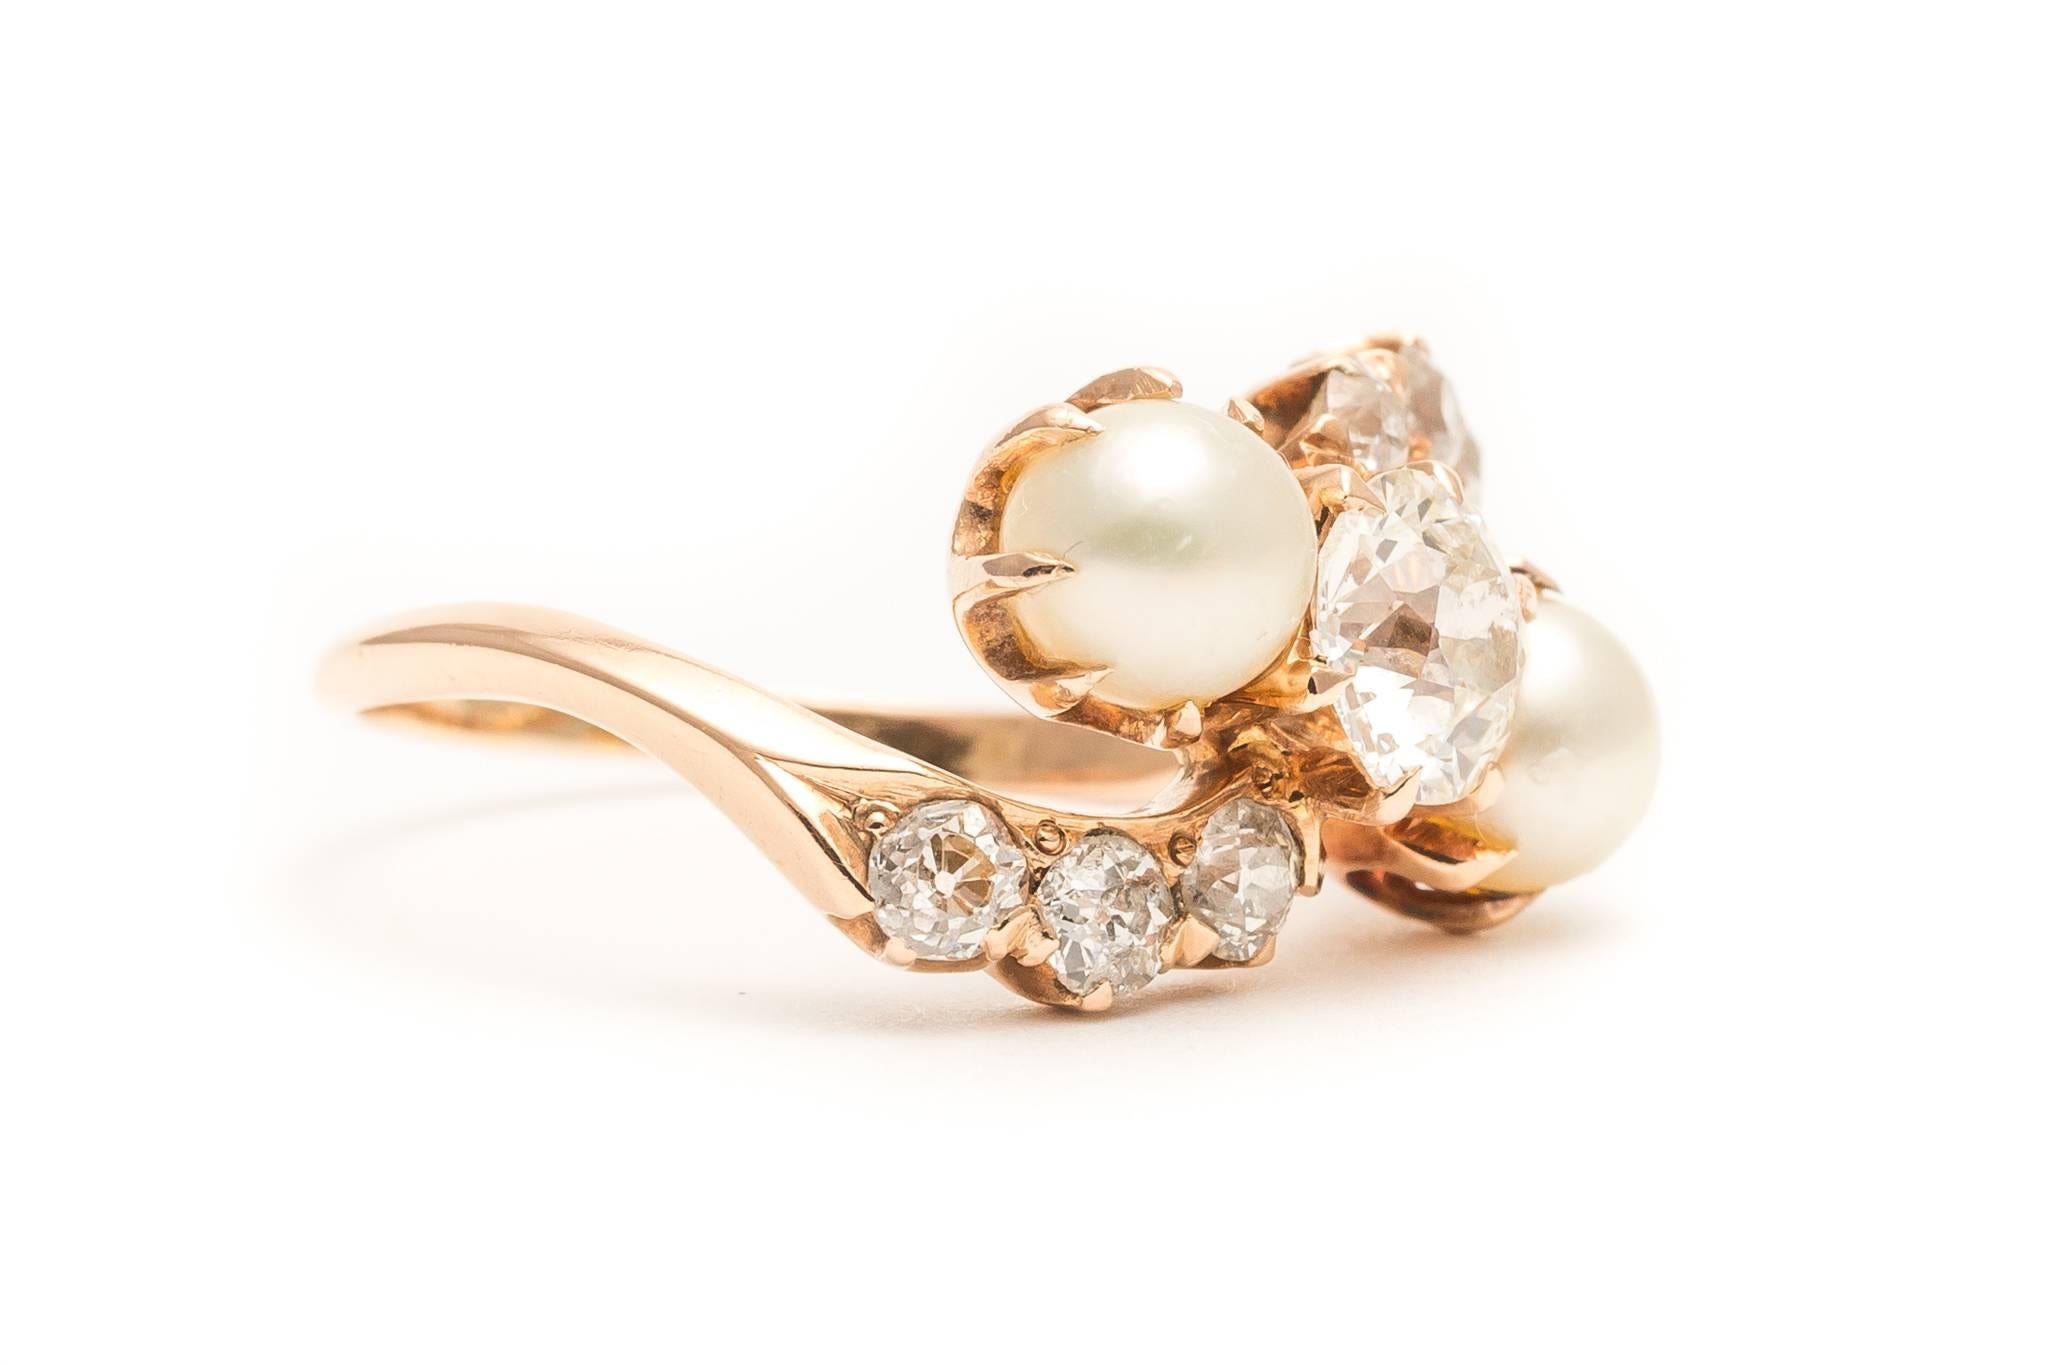 Beacon Hill Jewelers Presents:

A truly entrancing European cut diamond and pearl ring in rich yellow gold.  When we first acquired this ring, I must admit that I was a bit entranced by it.  The pinwheel like design with center diamond as center of